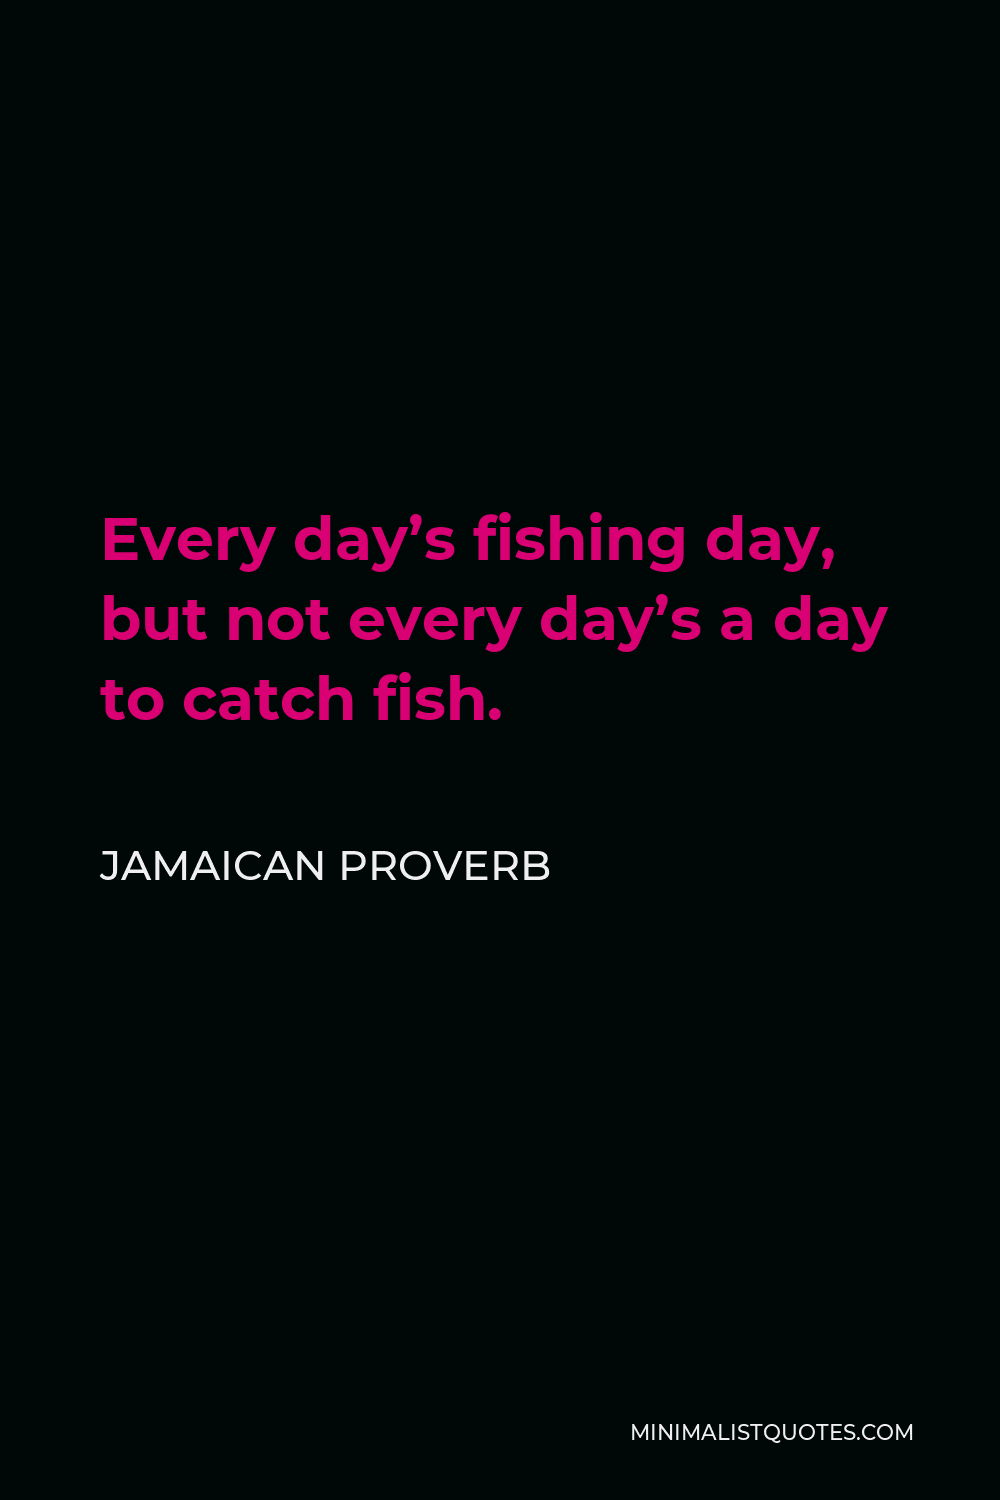 Jamaican Proverb Quote - Every day’s fishing day, but not every day’s a day to catch fish.